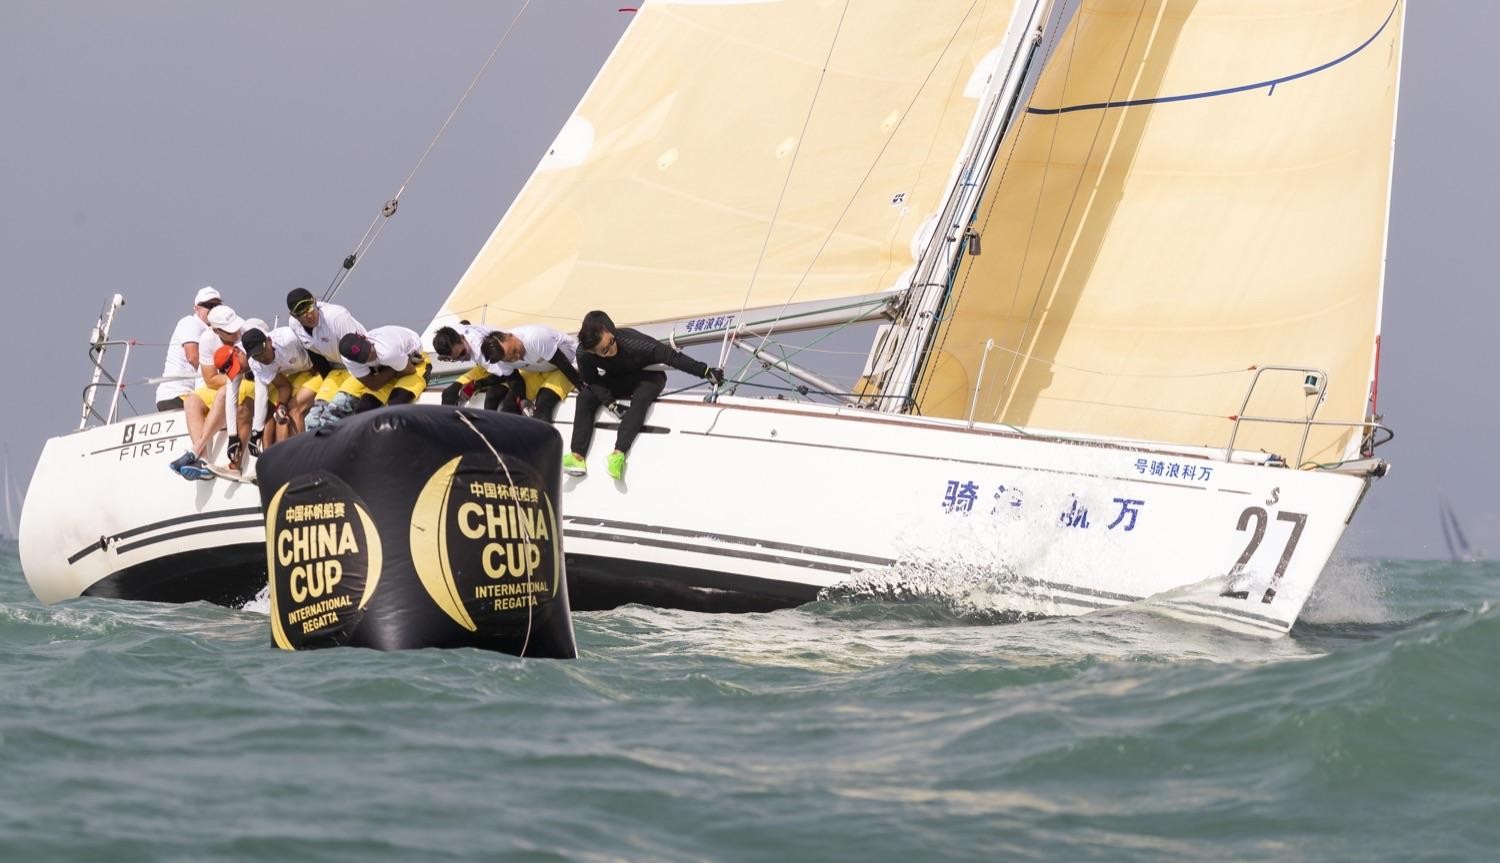  Kiwis back to regain title at 13th edition of China Cup